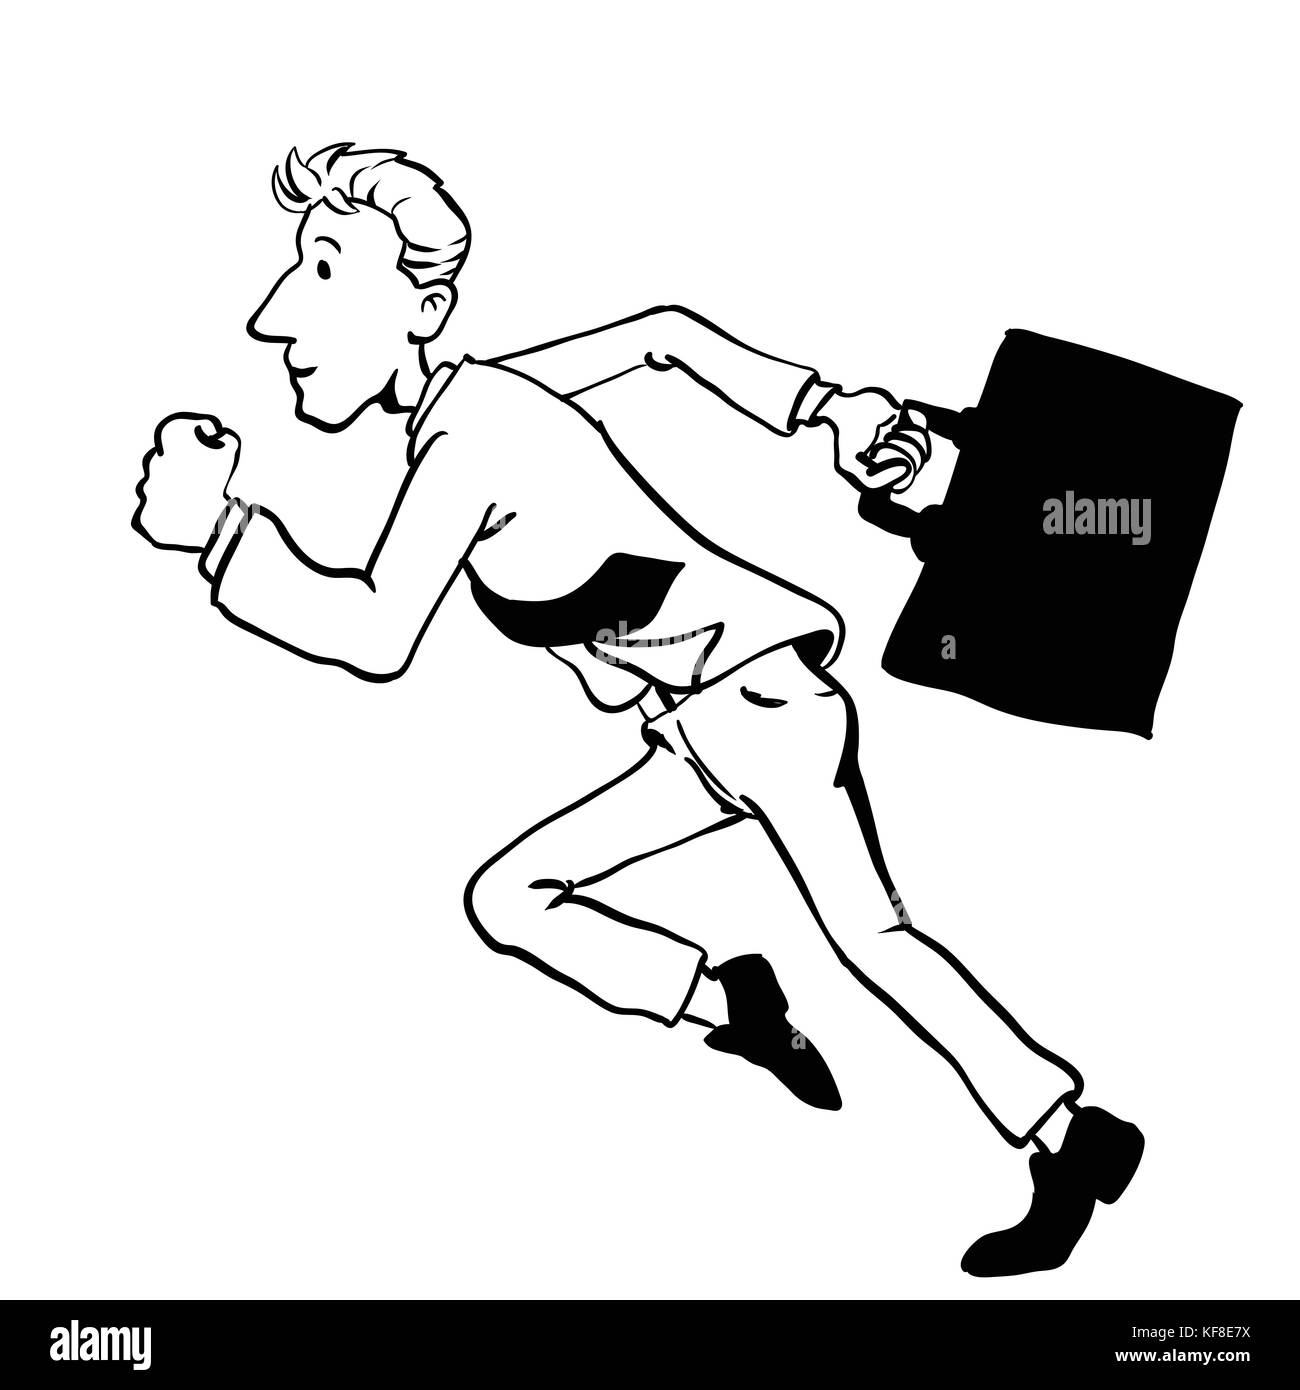 Illustration of Businessman running, a hand drawing of a businessman holding a briefcase running in a hurry. Vector Hand drawn Illustration, Stock Vector